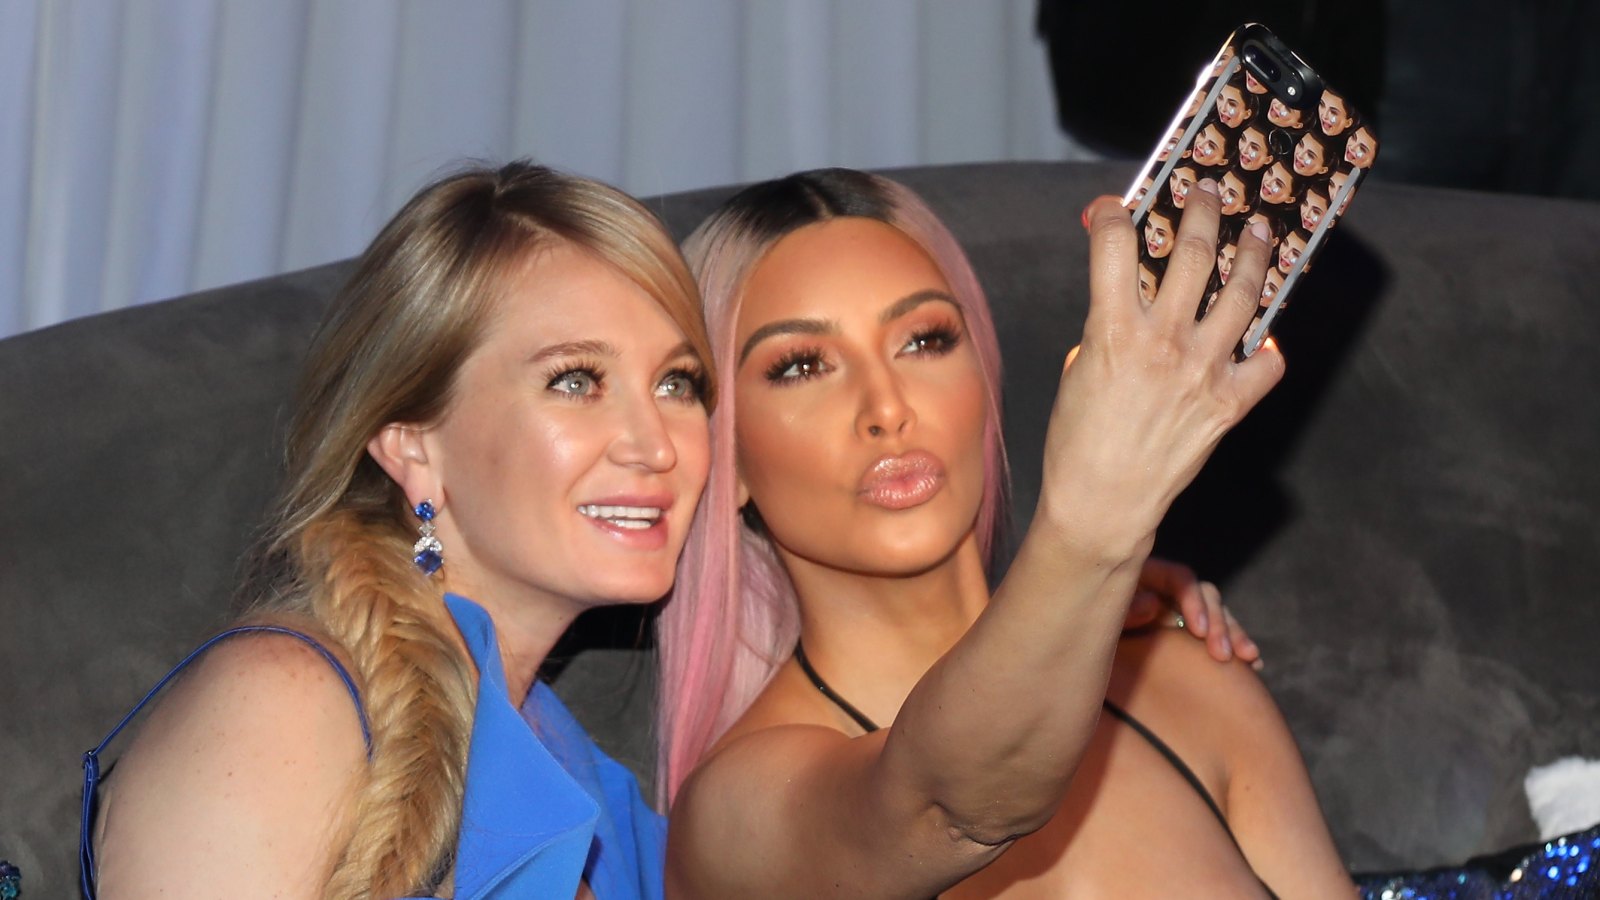 HOLLYWOOD, CA - MARCH 05: Marina Acton and Kim Kardashian take a selfie at the release of Marina Acton's new single "Fantasize" at Boulevard3 on March 5, 2018 in Hollywood, California. (Photo by Jerritt Clark/Getty Images)